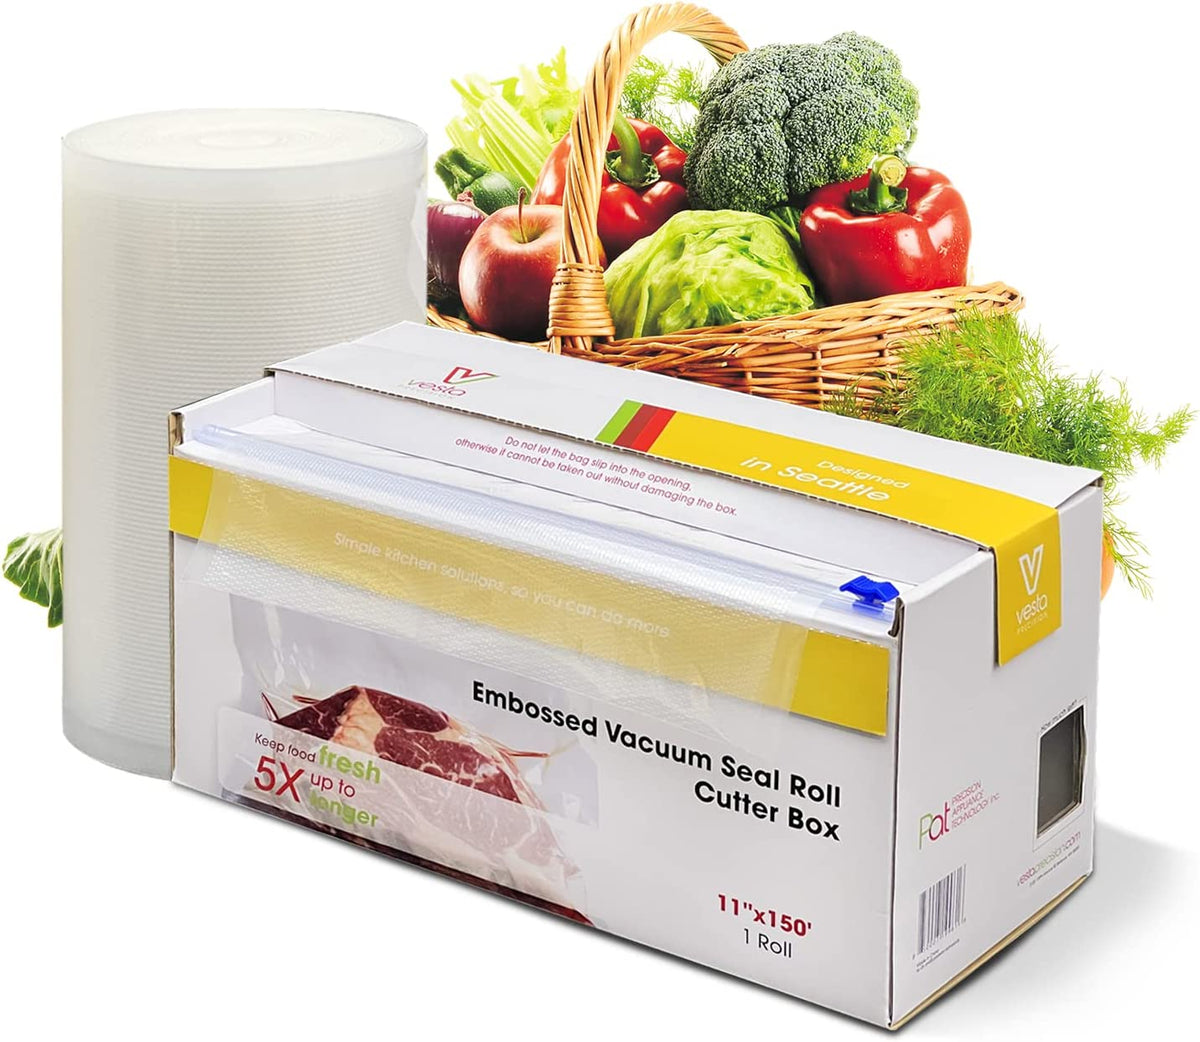 Harvest Keeper Compact Vacuum Sealer with Roll Cutter Vacuum